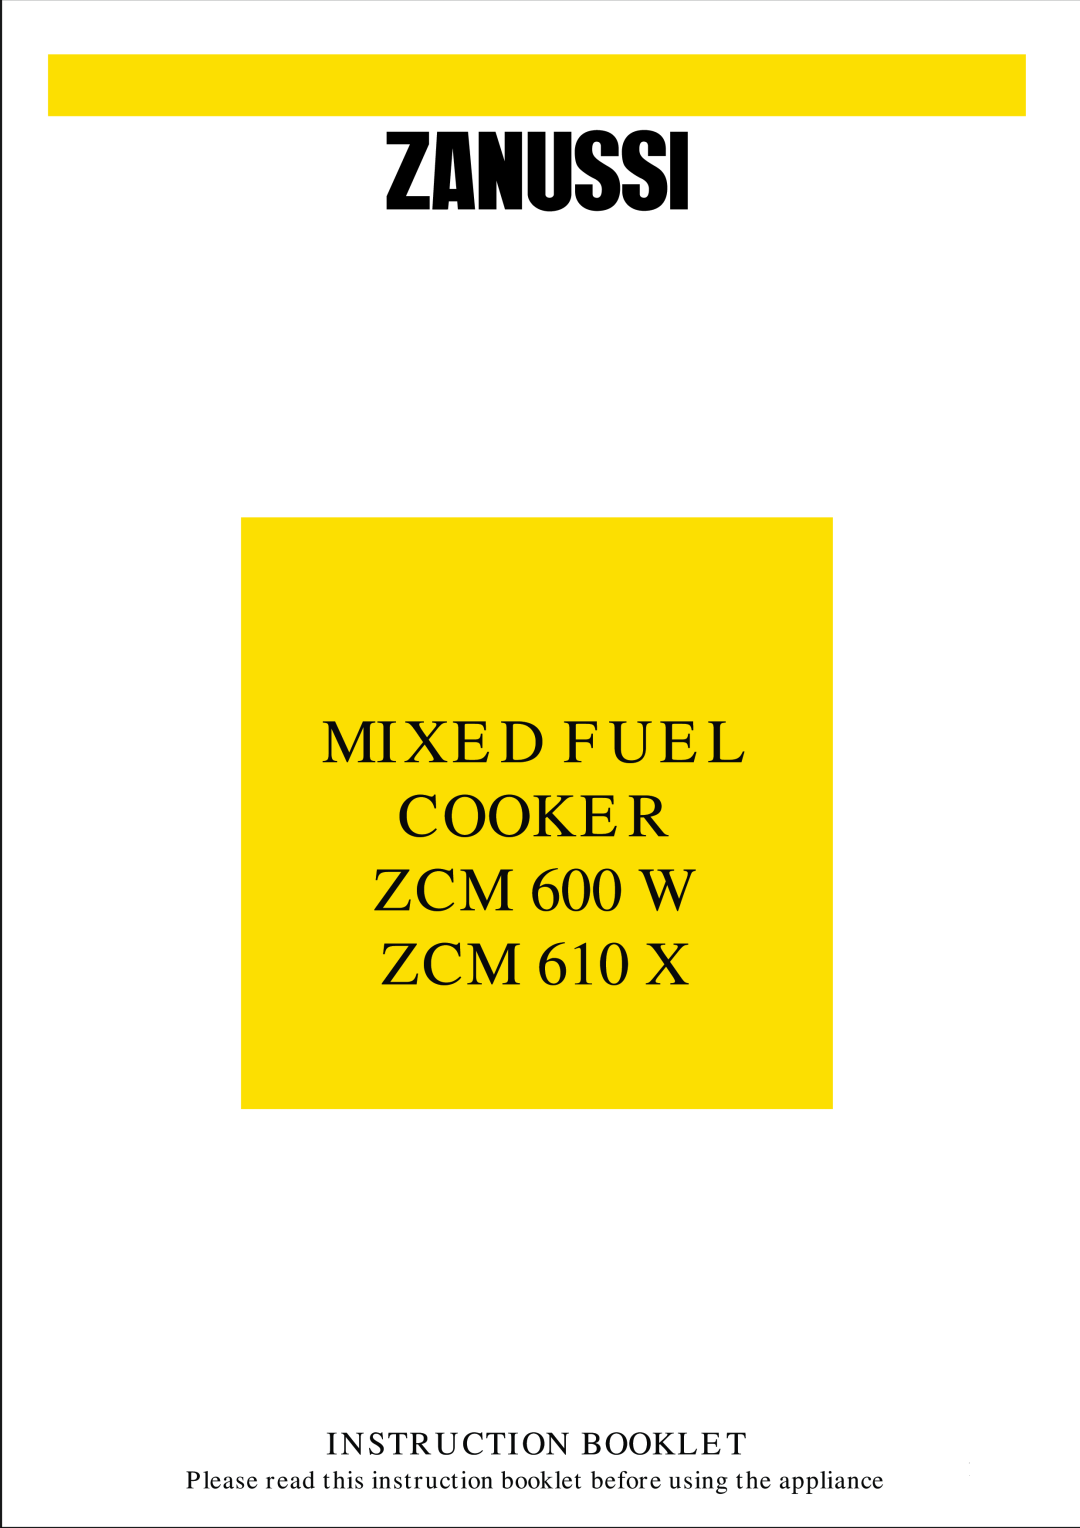 Zanussi ZCM 610 X manual MIXED FUEL COOKER ZCM 600 W ZCM, Instruction Booklet 